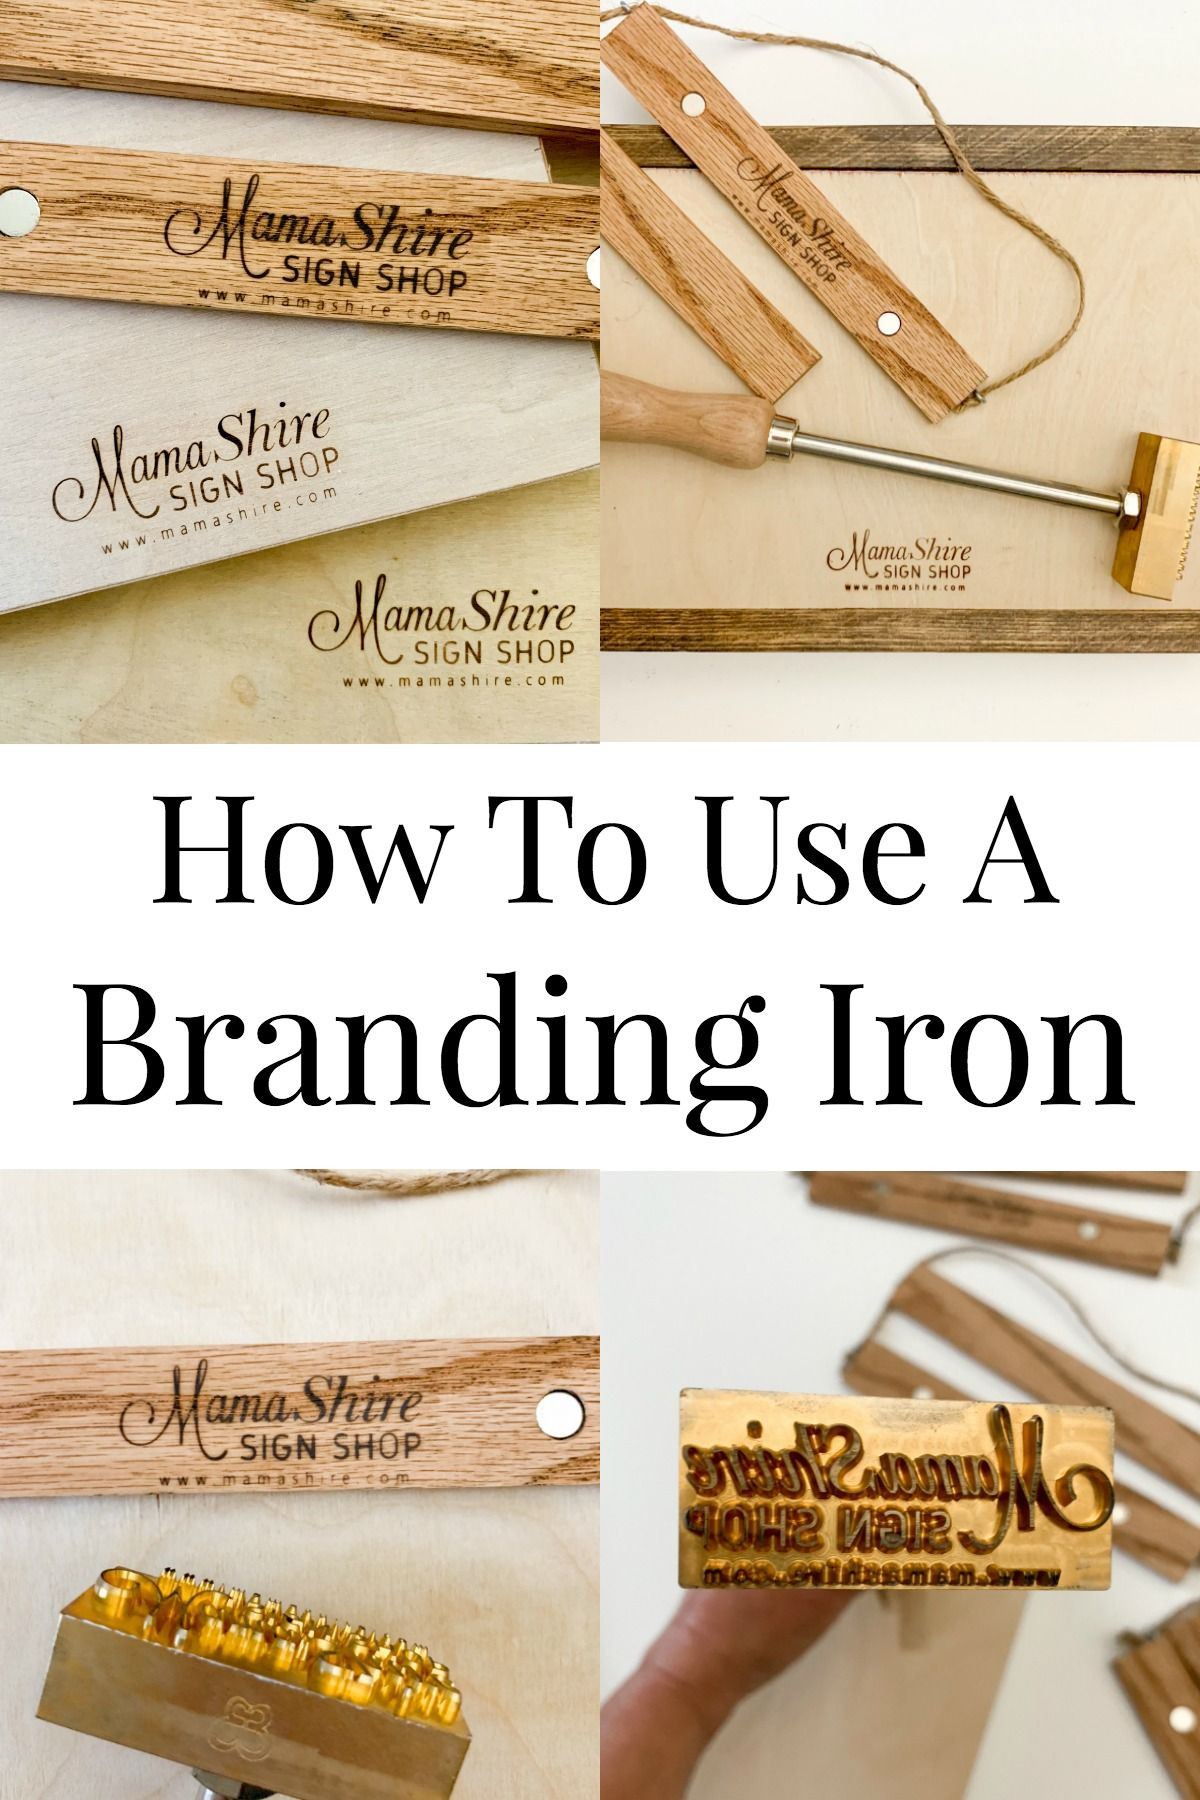 How To Brand Wood DIY
 How To Use A Branding Iron Wood